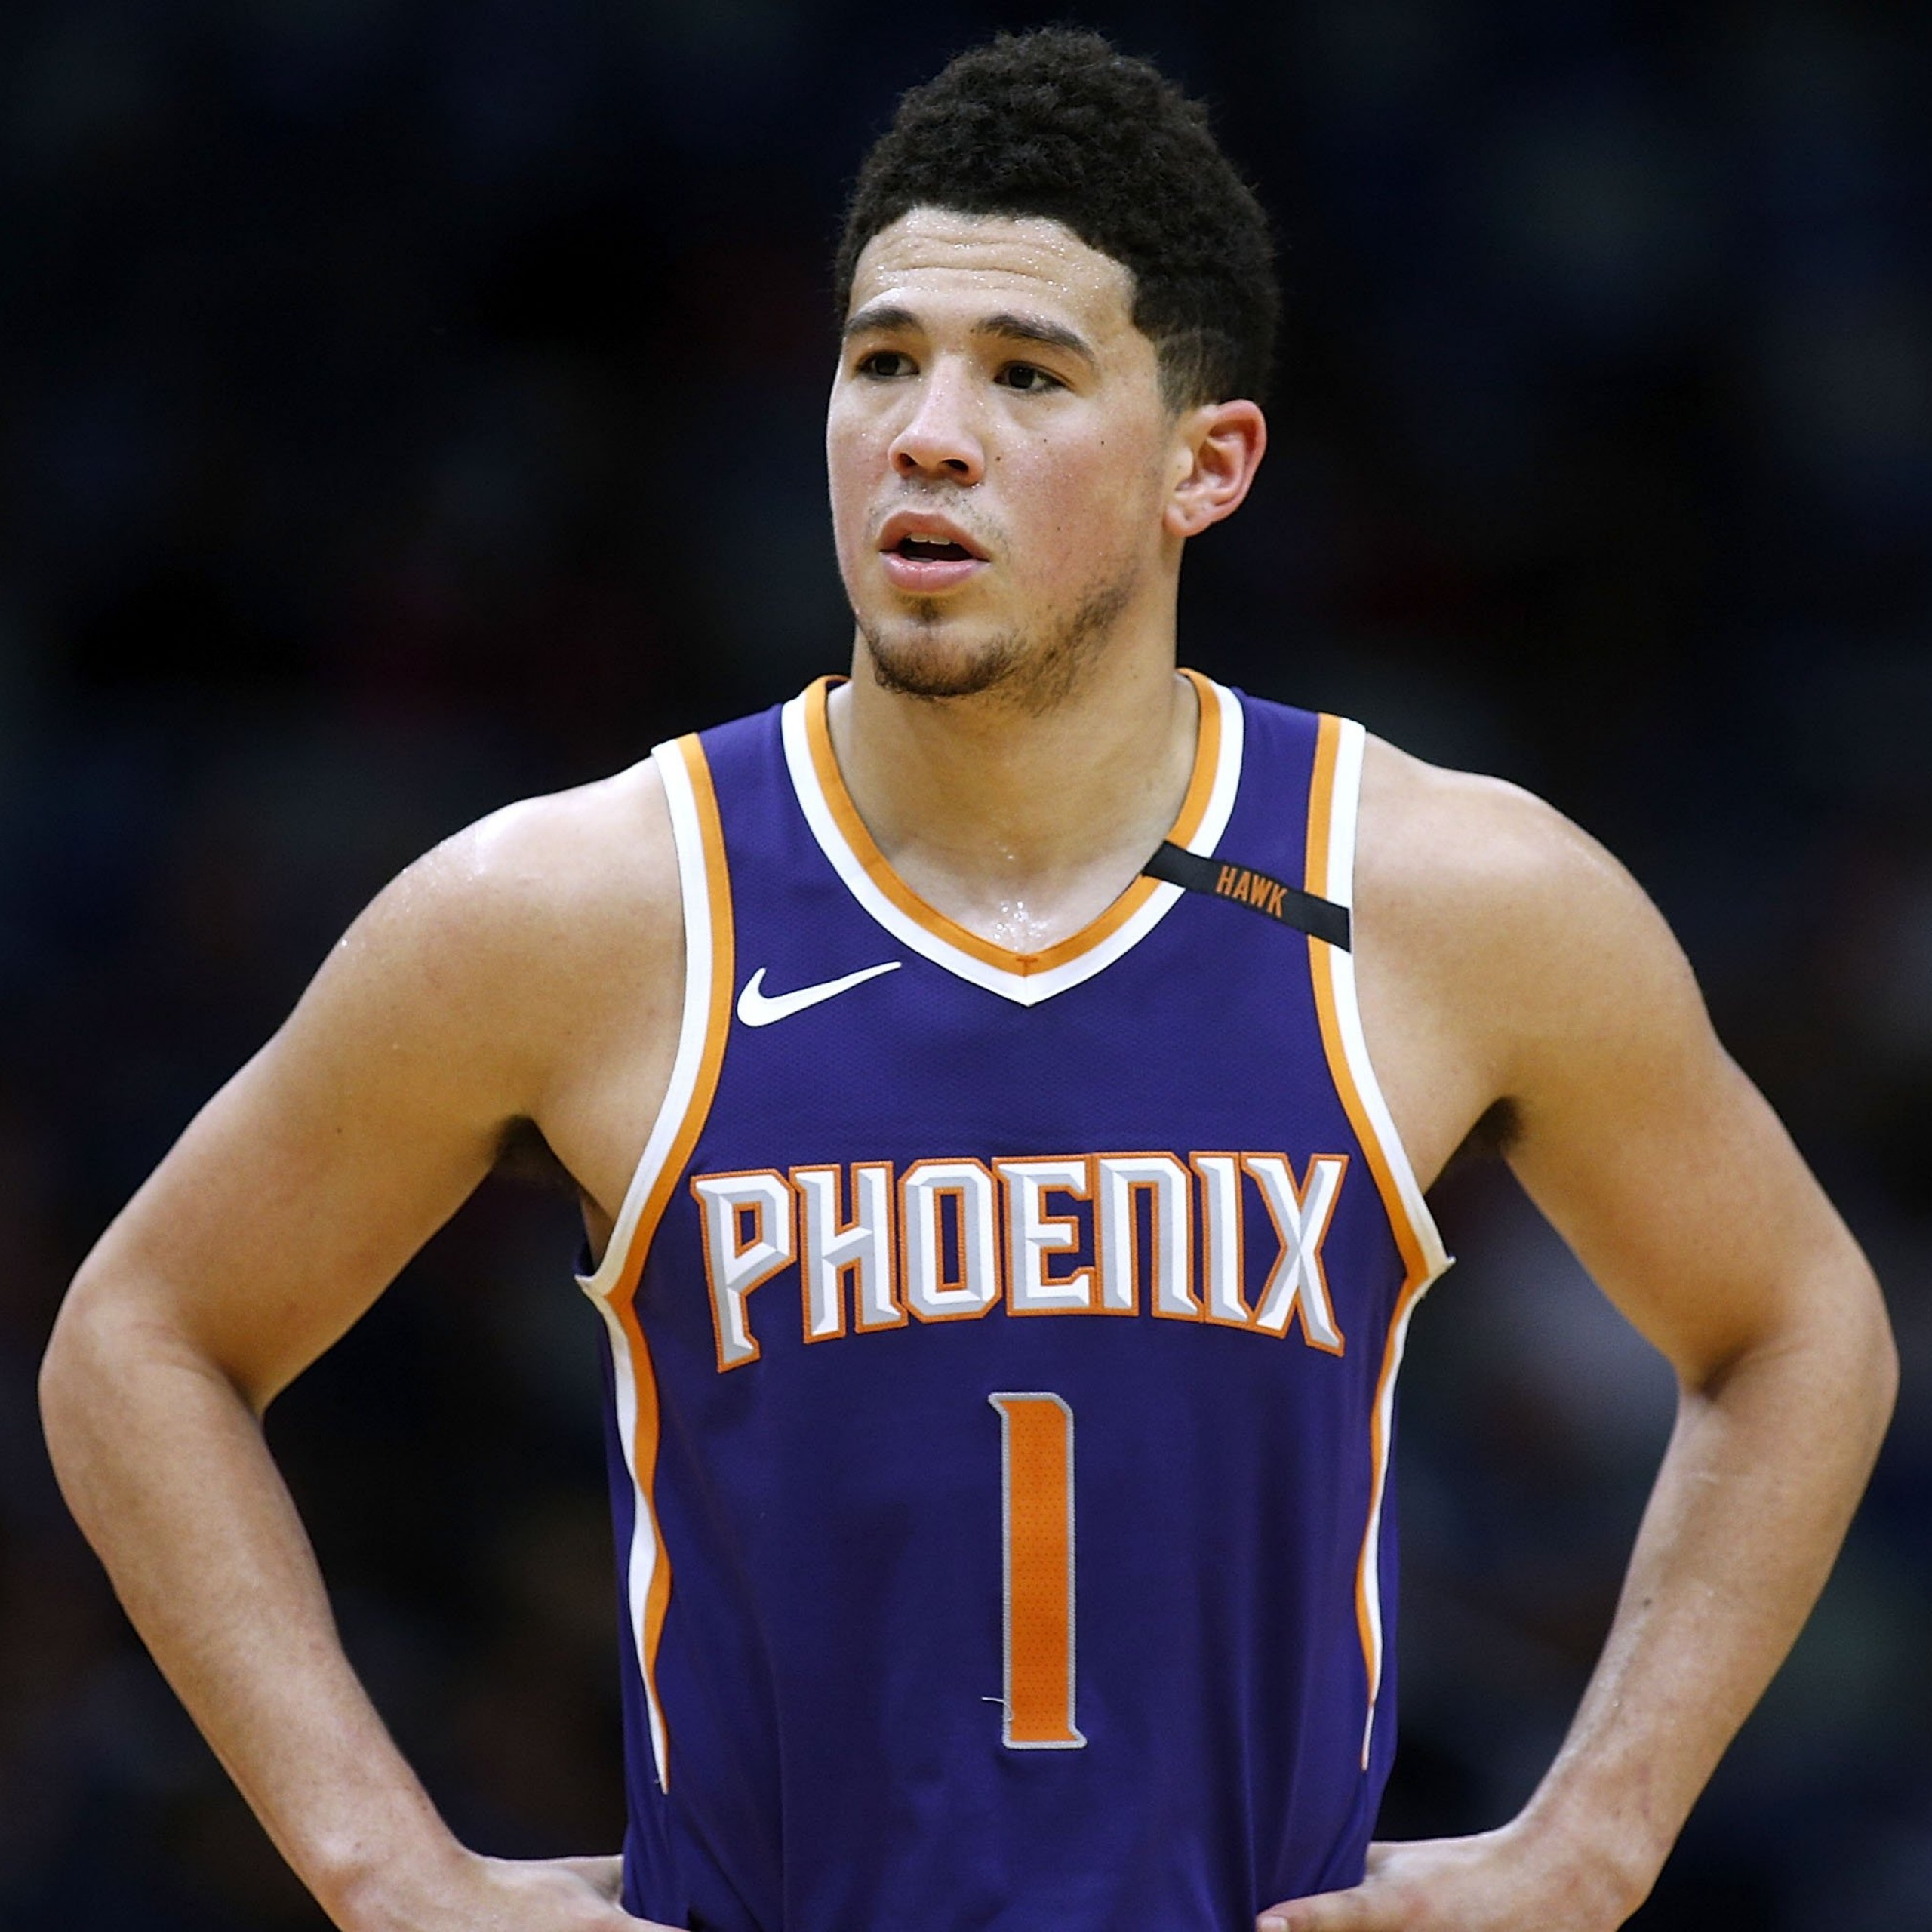 HoopsWallpaperscom  Get the latest HD and mobile NBA wallpapers today Devin  Booker Archives  HoopsWallpaperscom  Get the latest HD and mobile NBA  wallpapers today